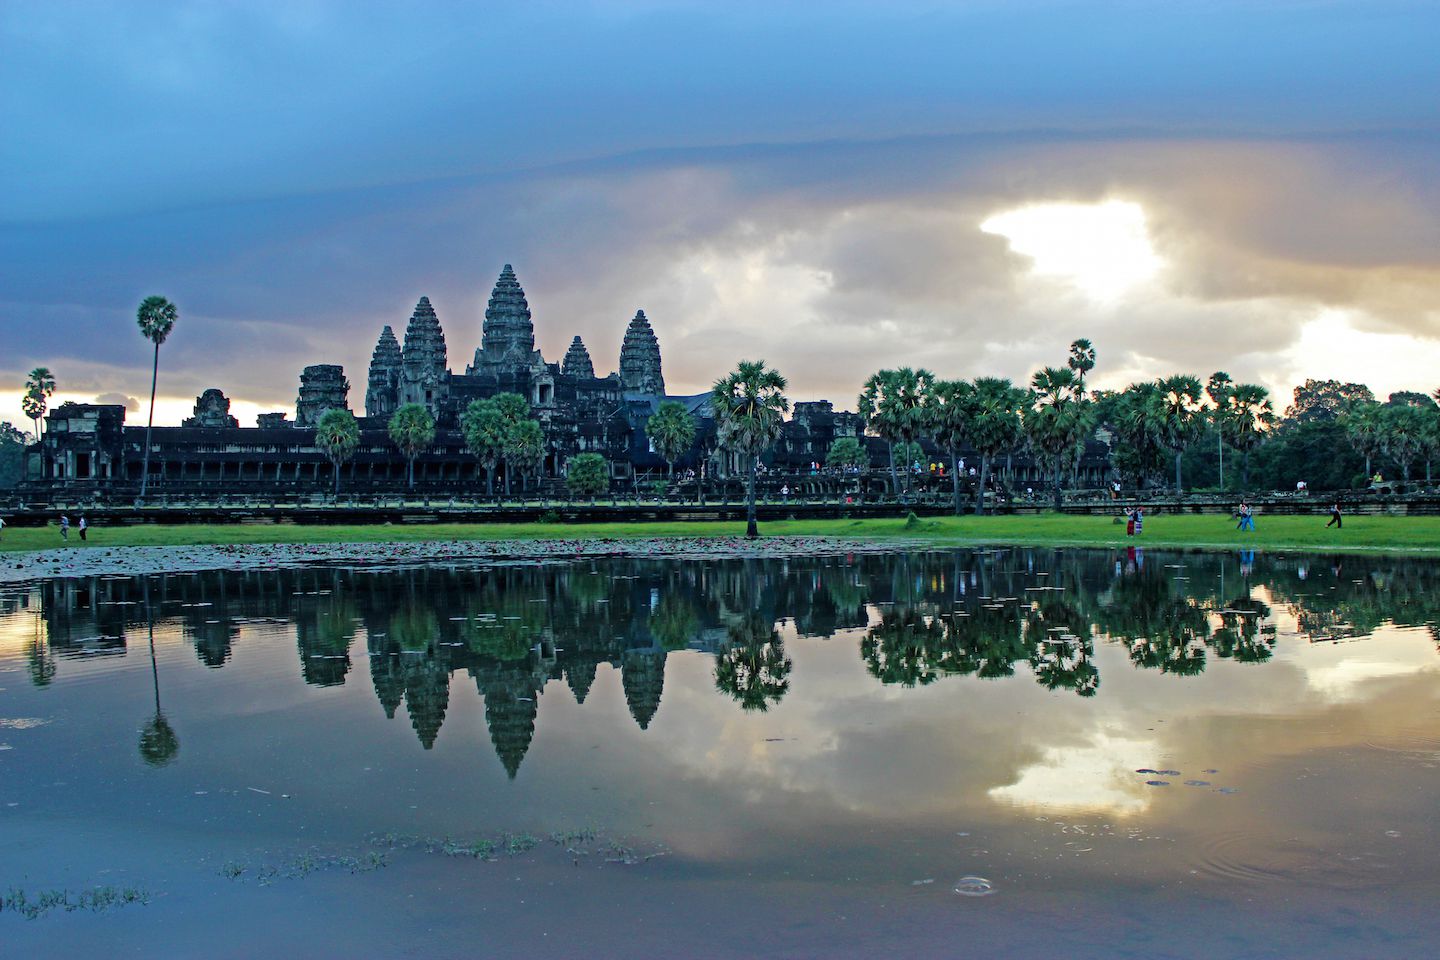 Third attempt: the clouds provided an interesting view of Angkor Wat